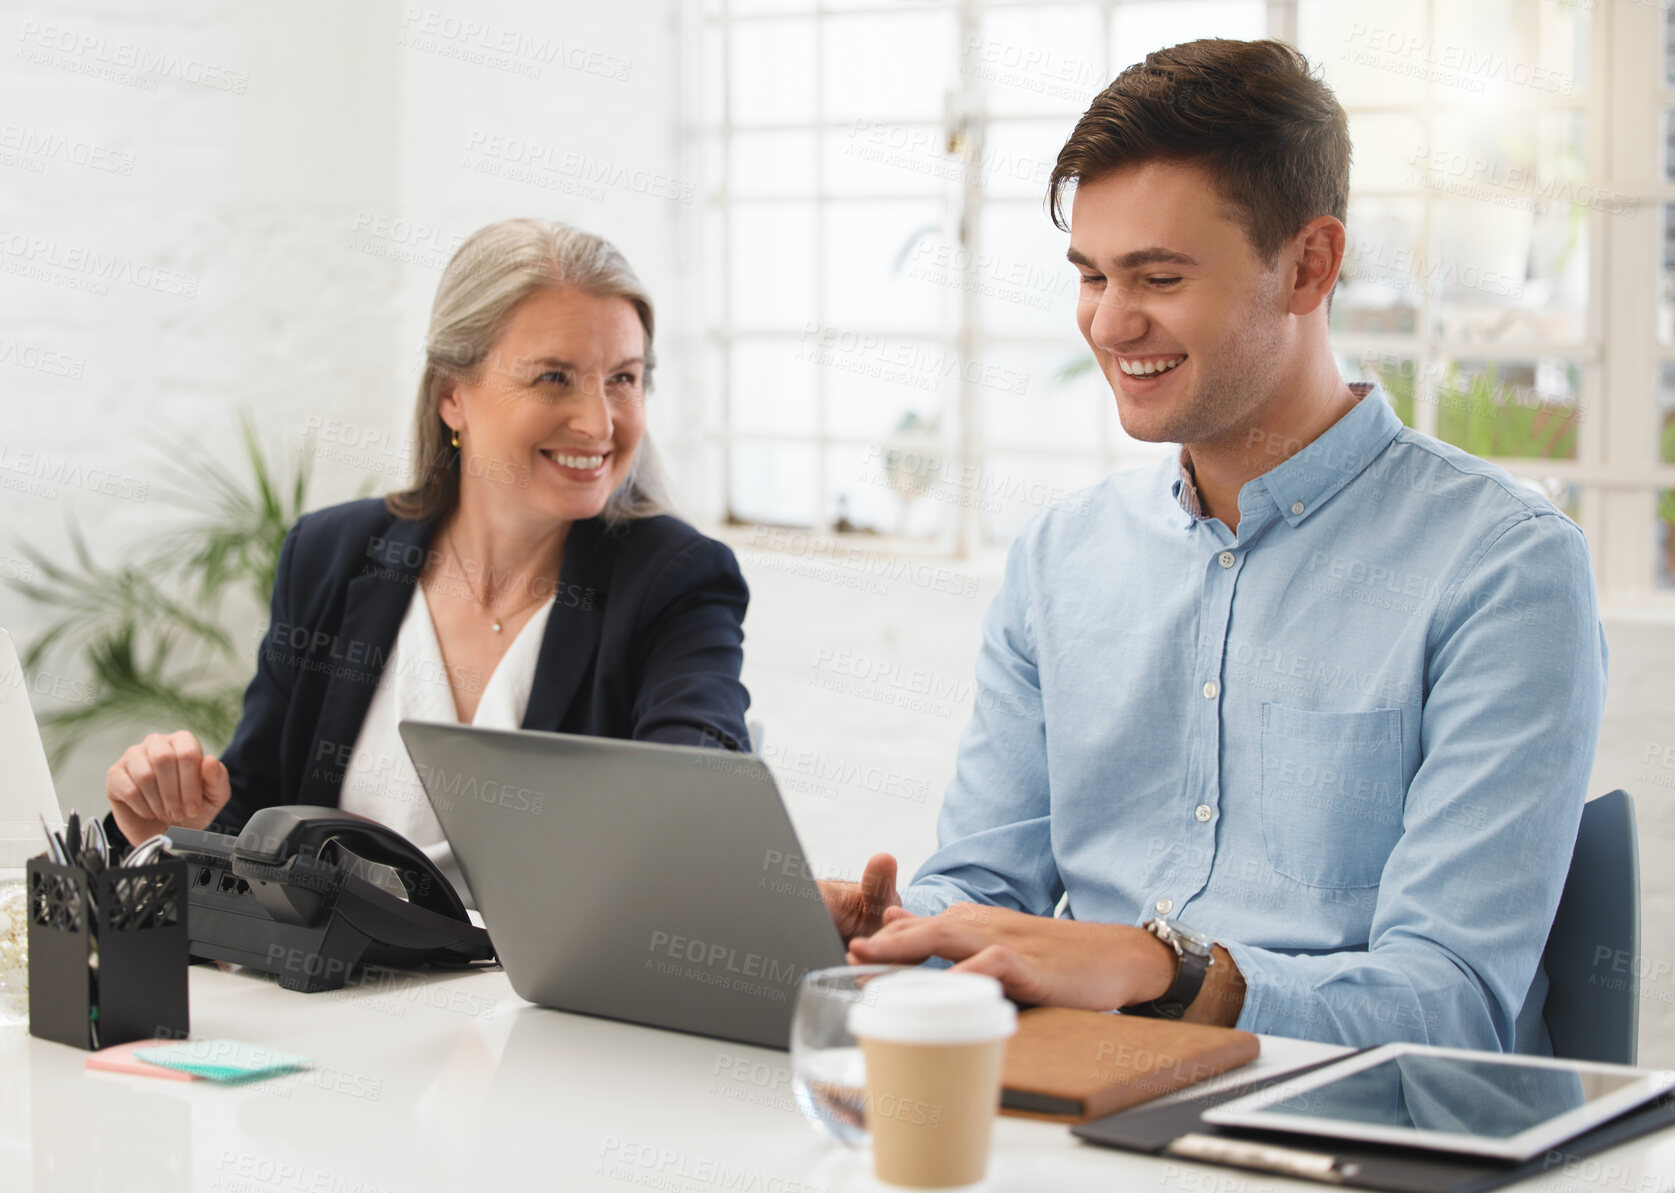 Buy stock photo Mature caucasian businesswoman talking to a young male colleague while working on a laptop together at work. Two colleagues laughing while sitting at a desk together. Businessman typing on a laptop and talking to a coworker